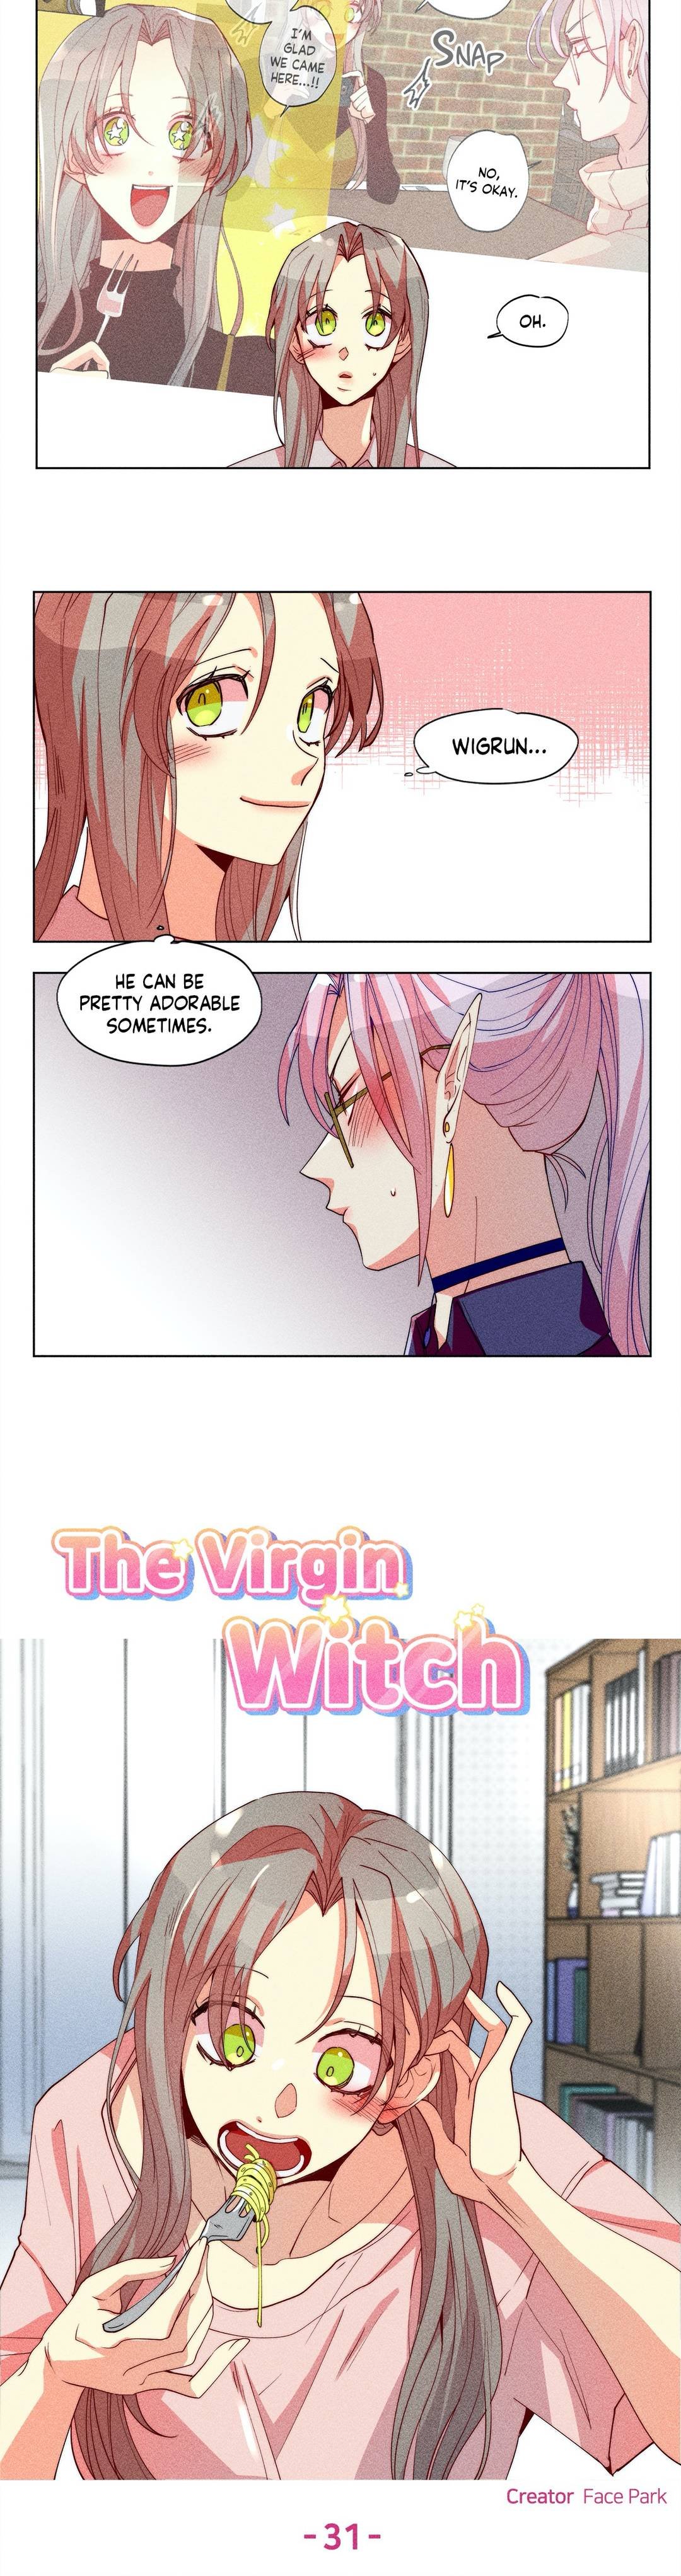 the-virgin-witch-chap-31-2